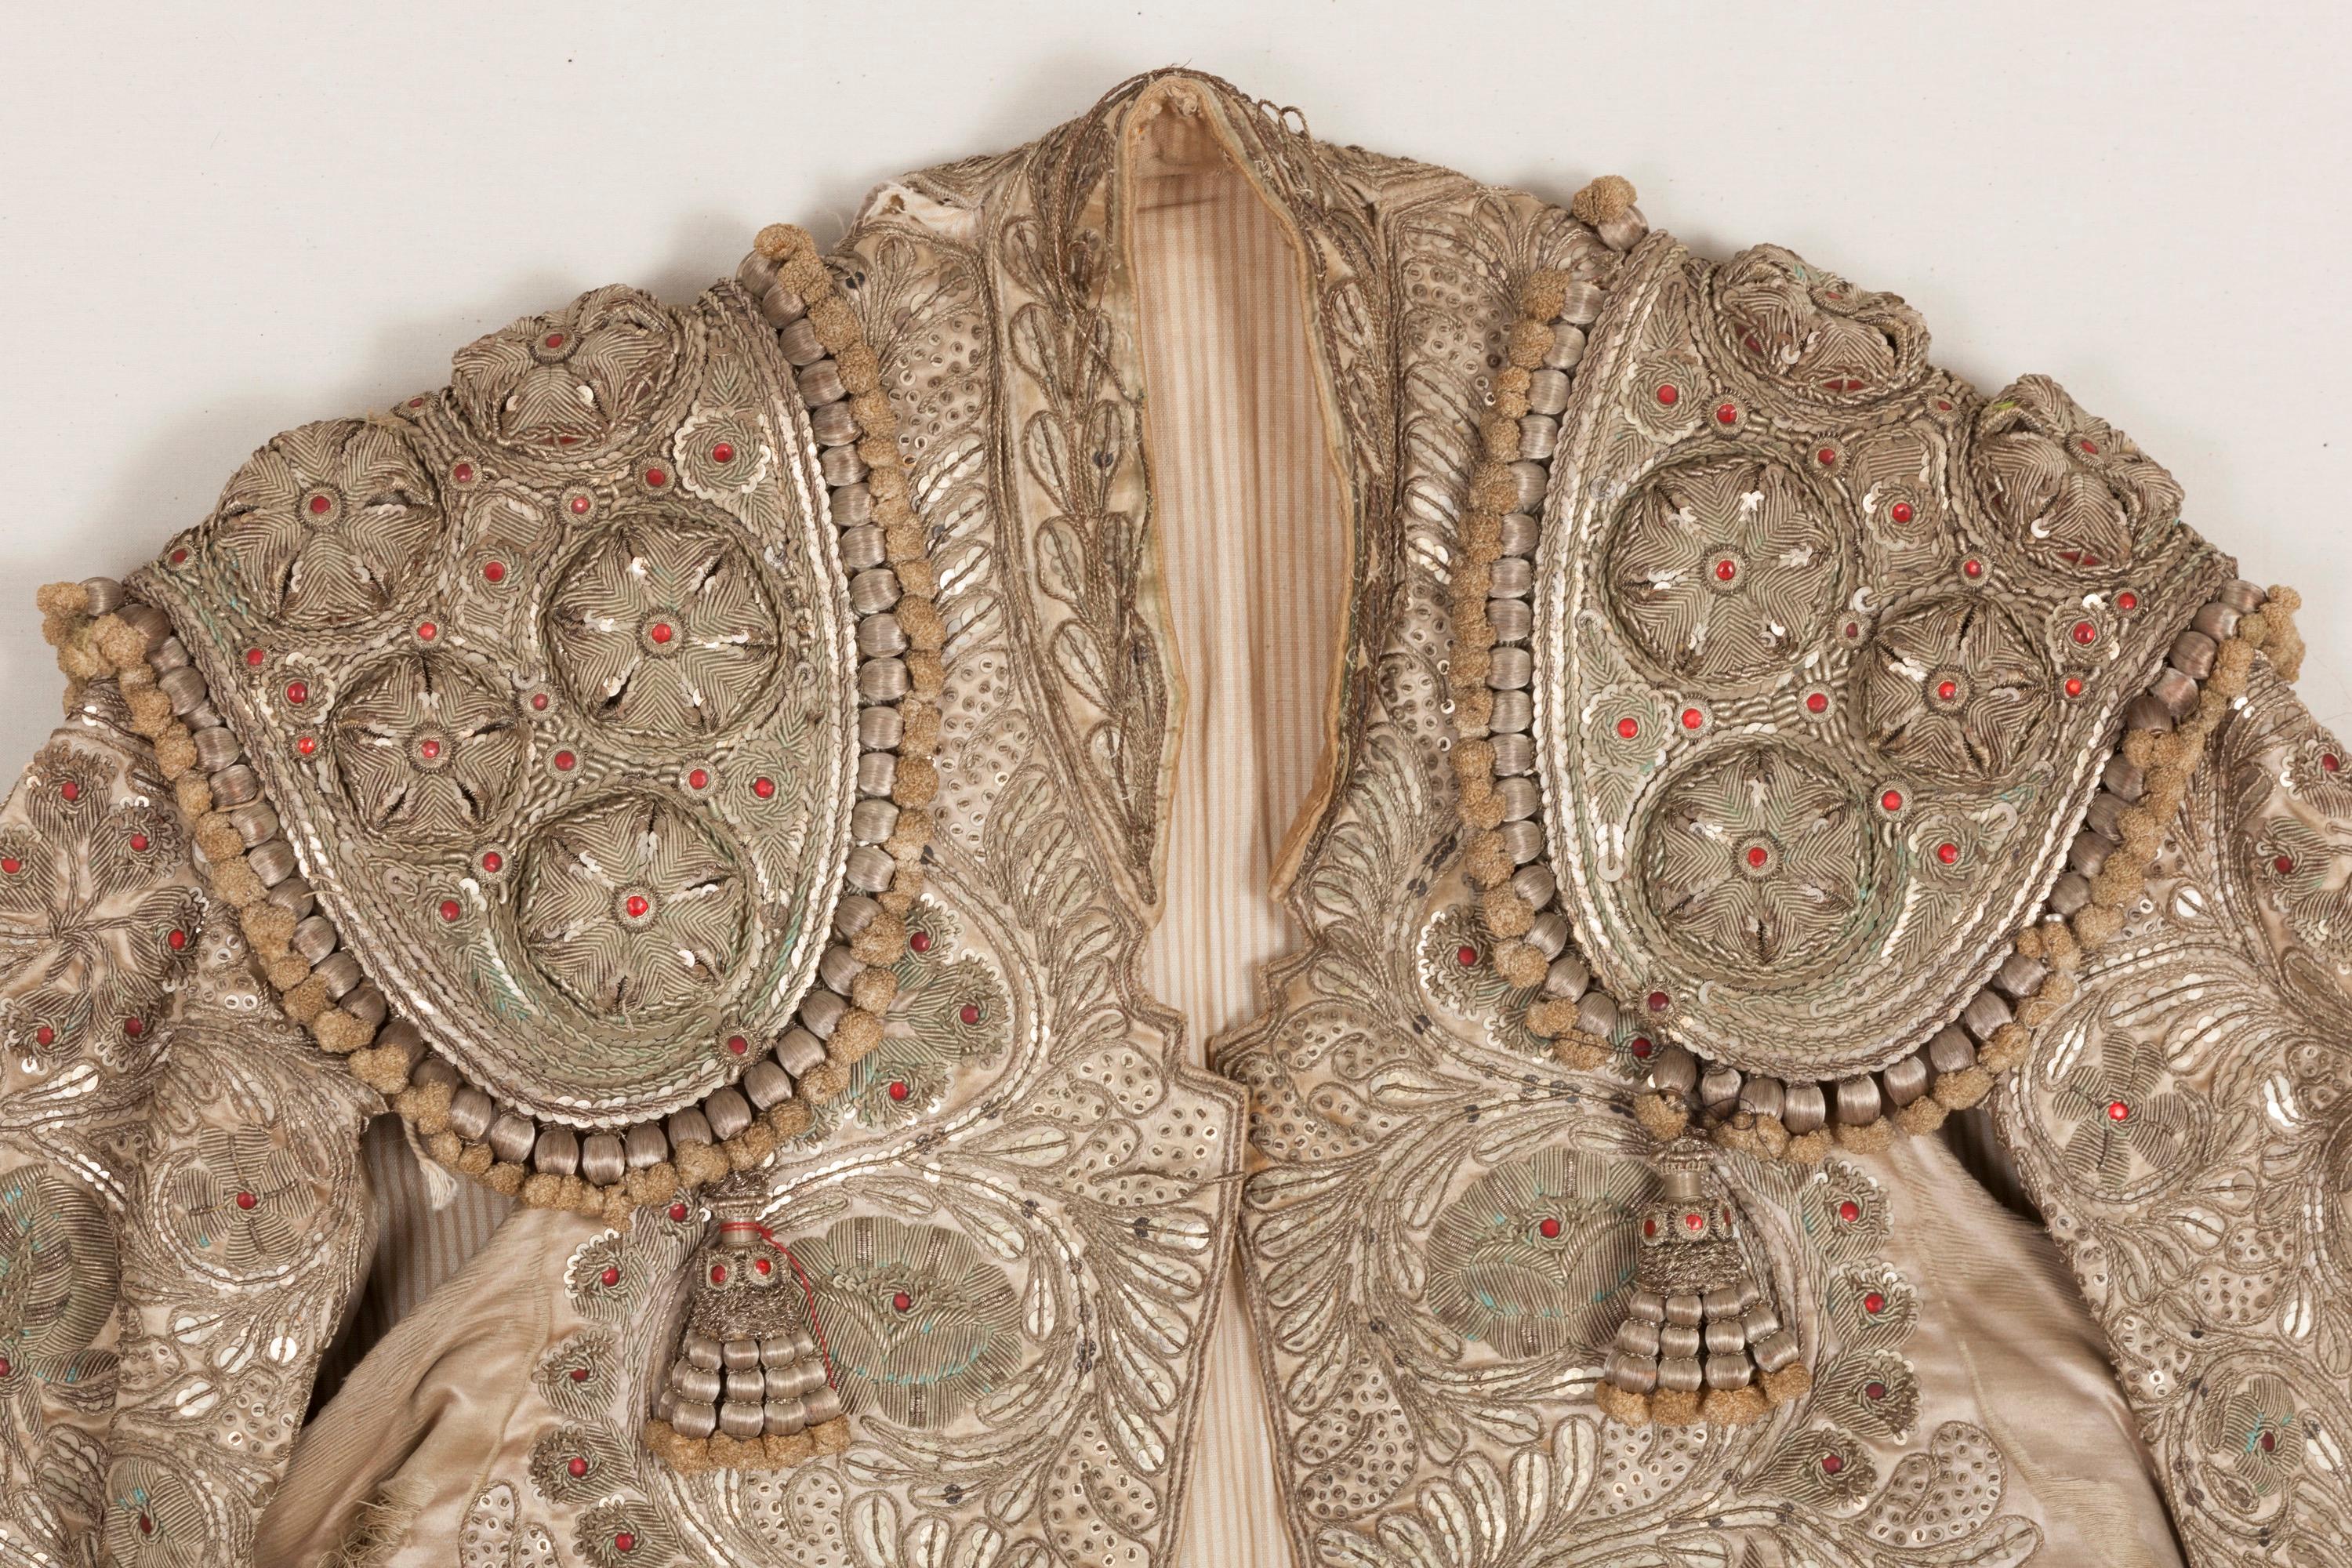 3-Piece Matador's Costume Late 19th-Early 20th Century Spanish  For Sale 6